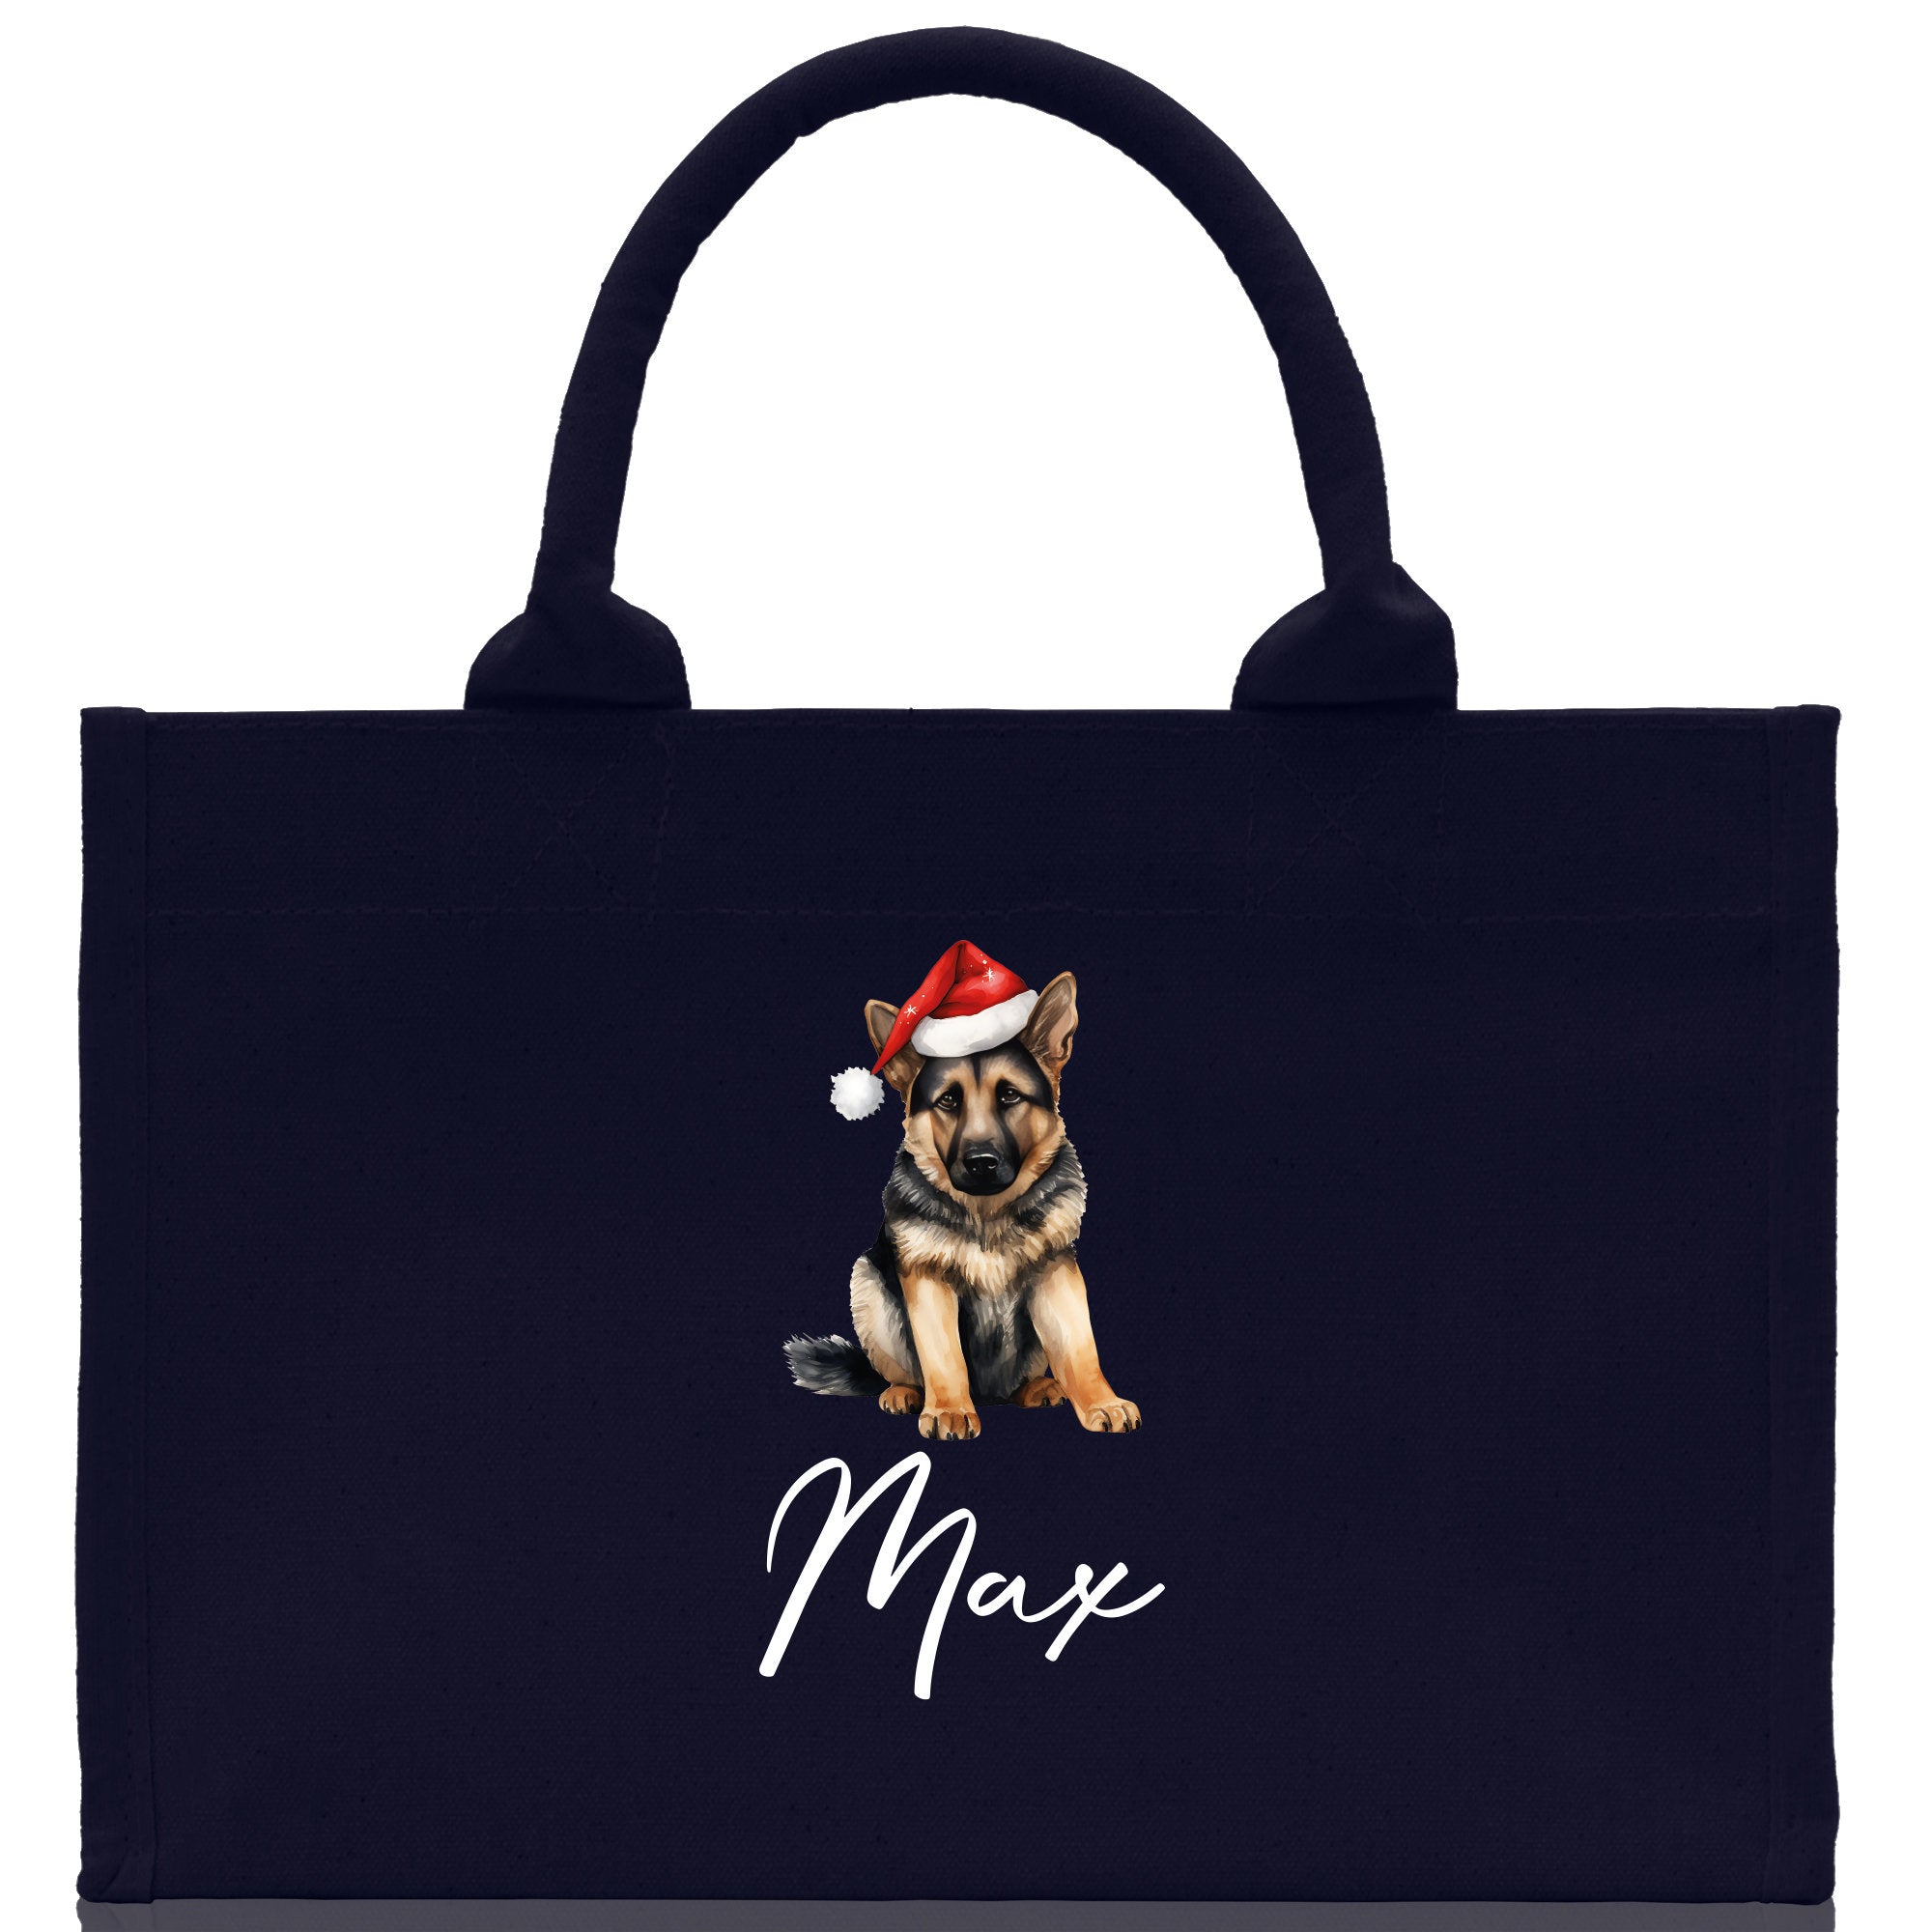 a black bag with a dog wearing a santa hat